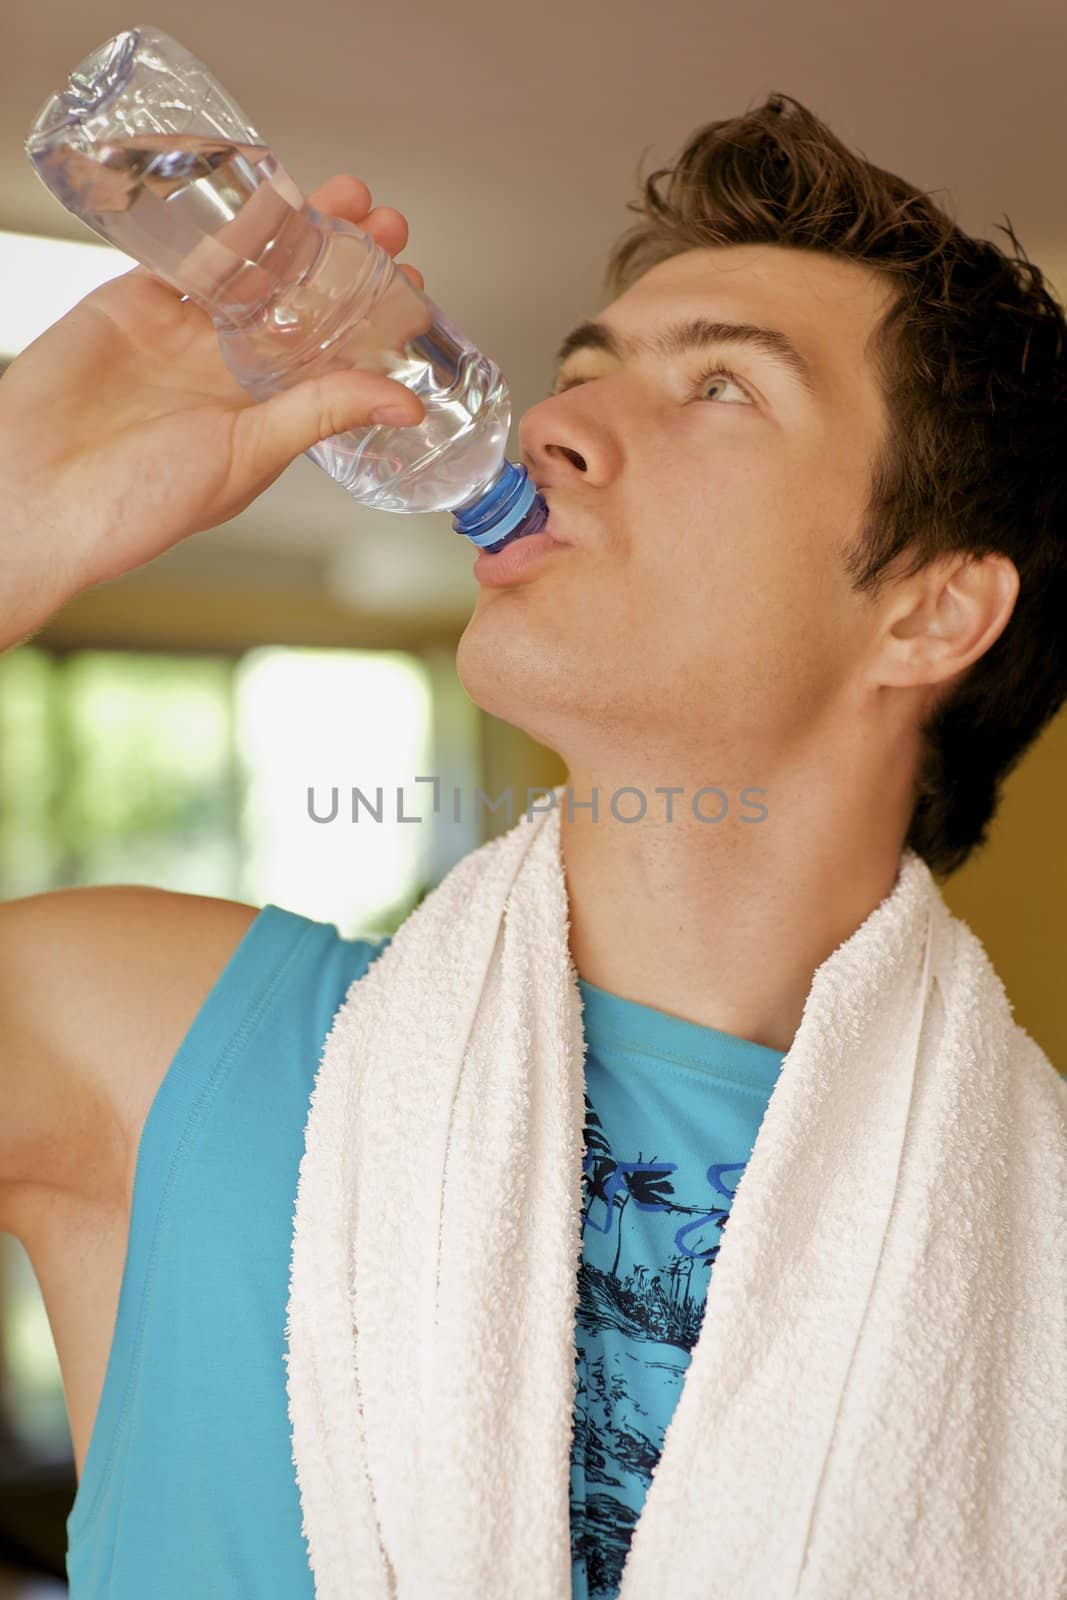 A young man drinking a bottle of water